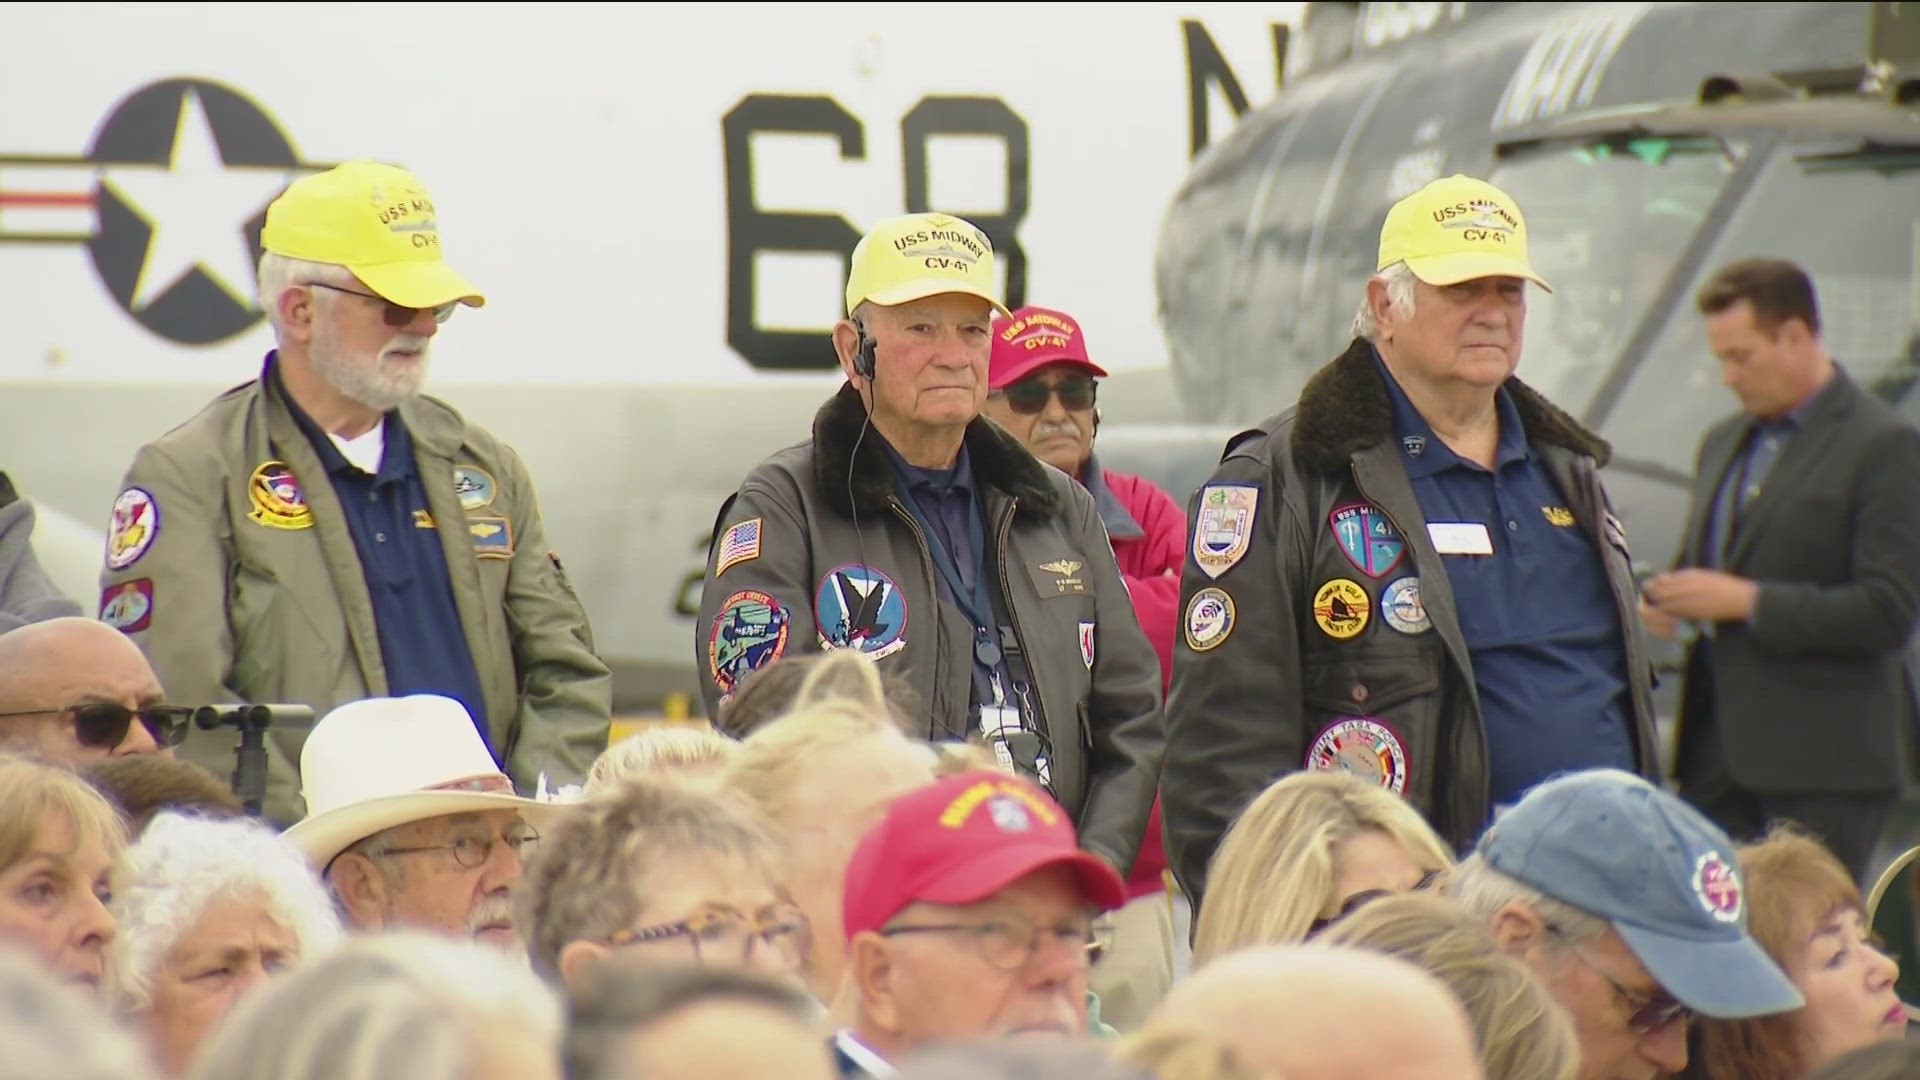 The USS Midway Museum held its annual commemoration ceremony Monday to honor all U.S. fallen service members.